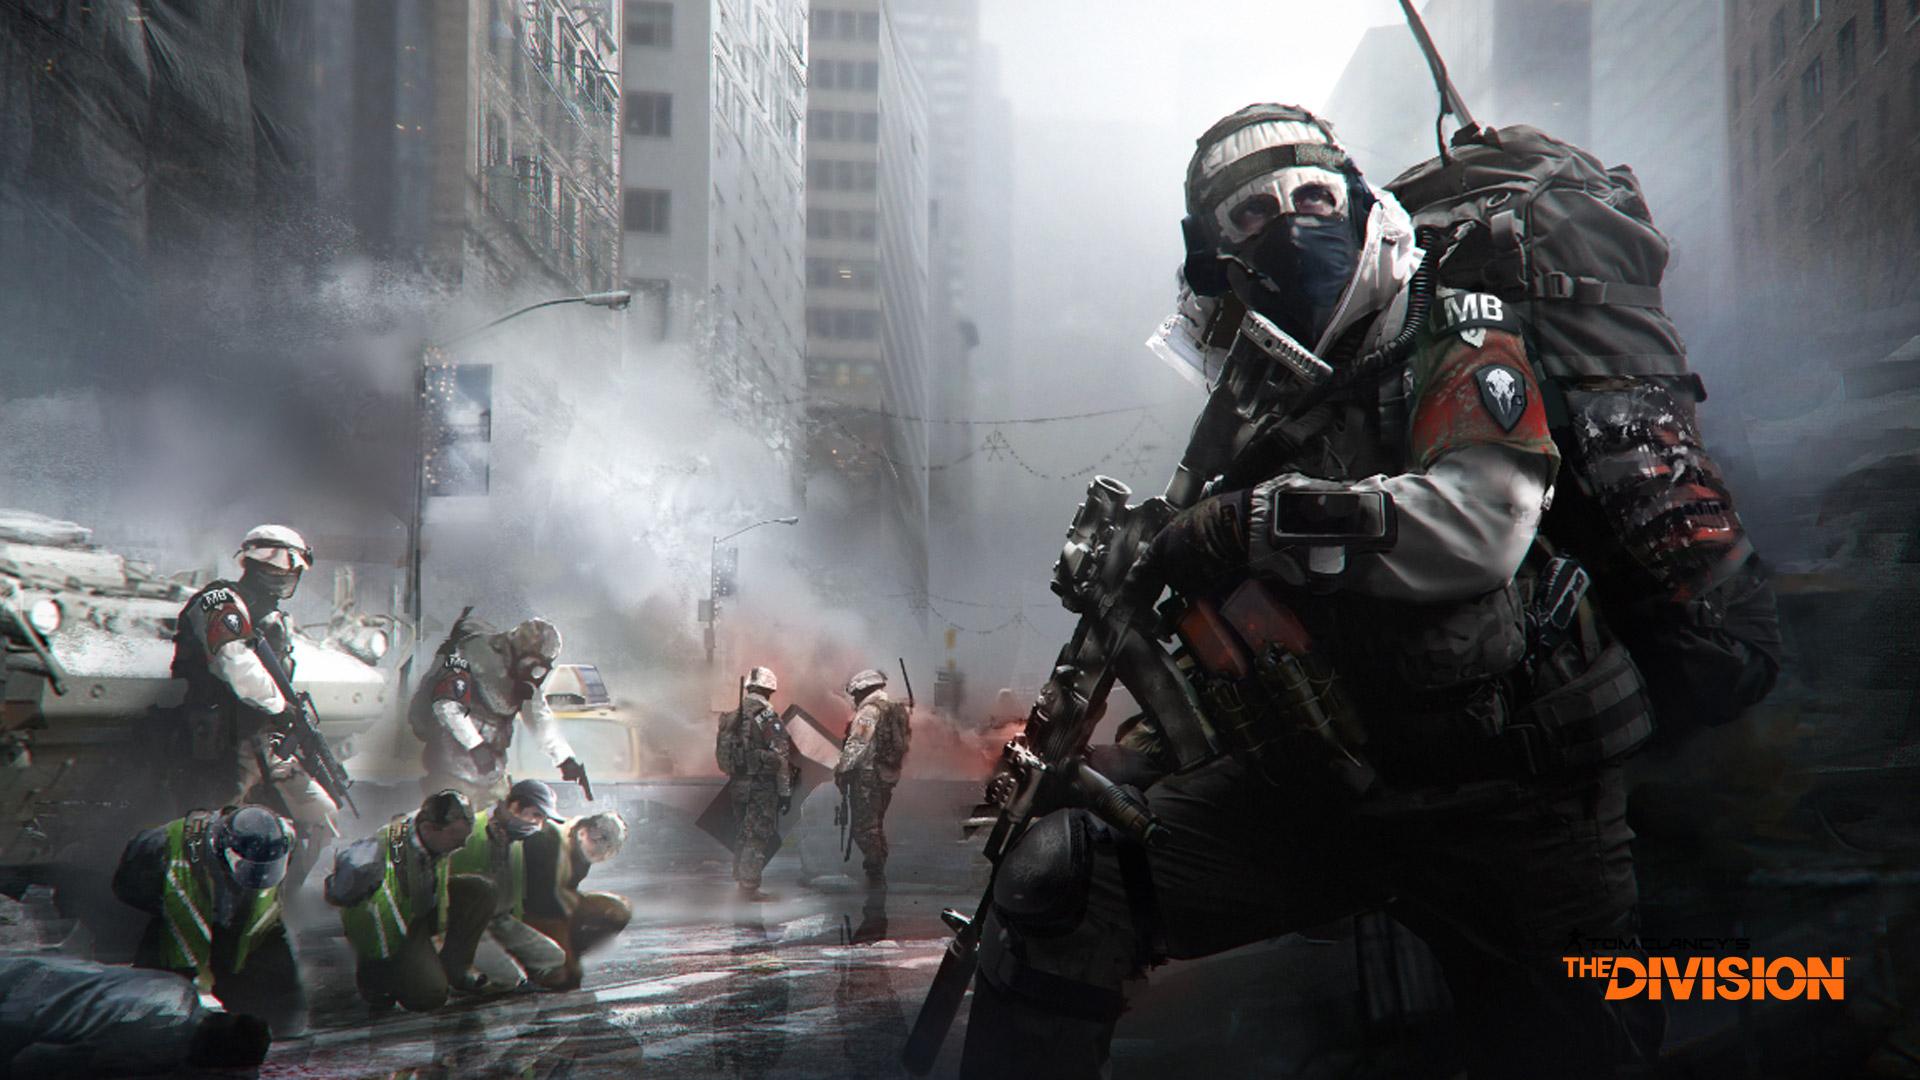 Free The Division Wallpaper in 1920x1080